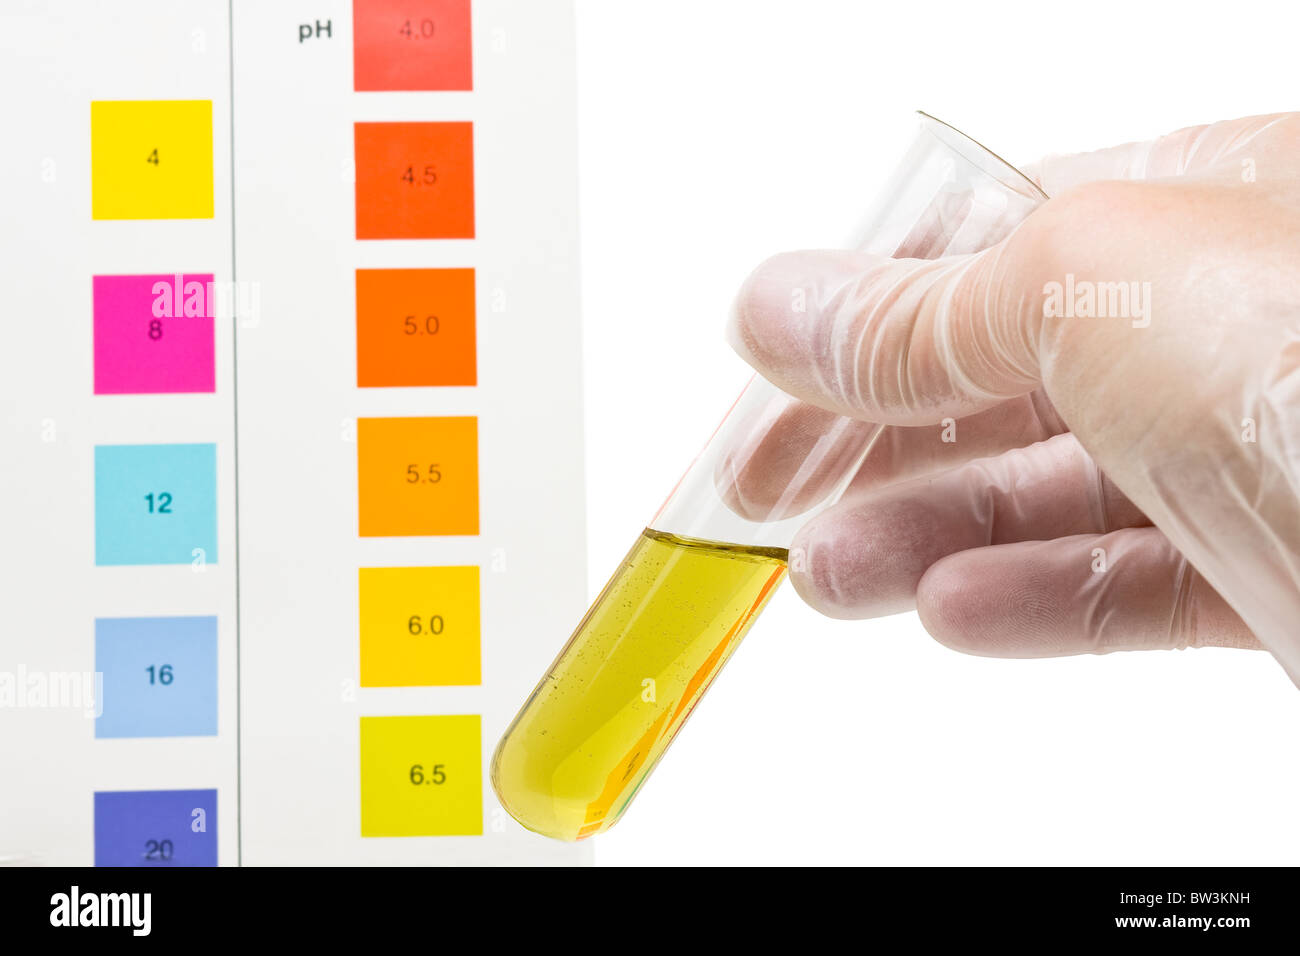 Hand holding test tube with pH indicator comparing color to scale Stock Photo